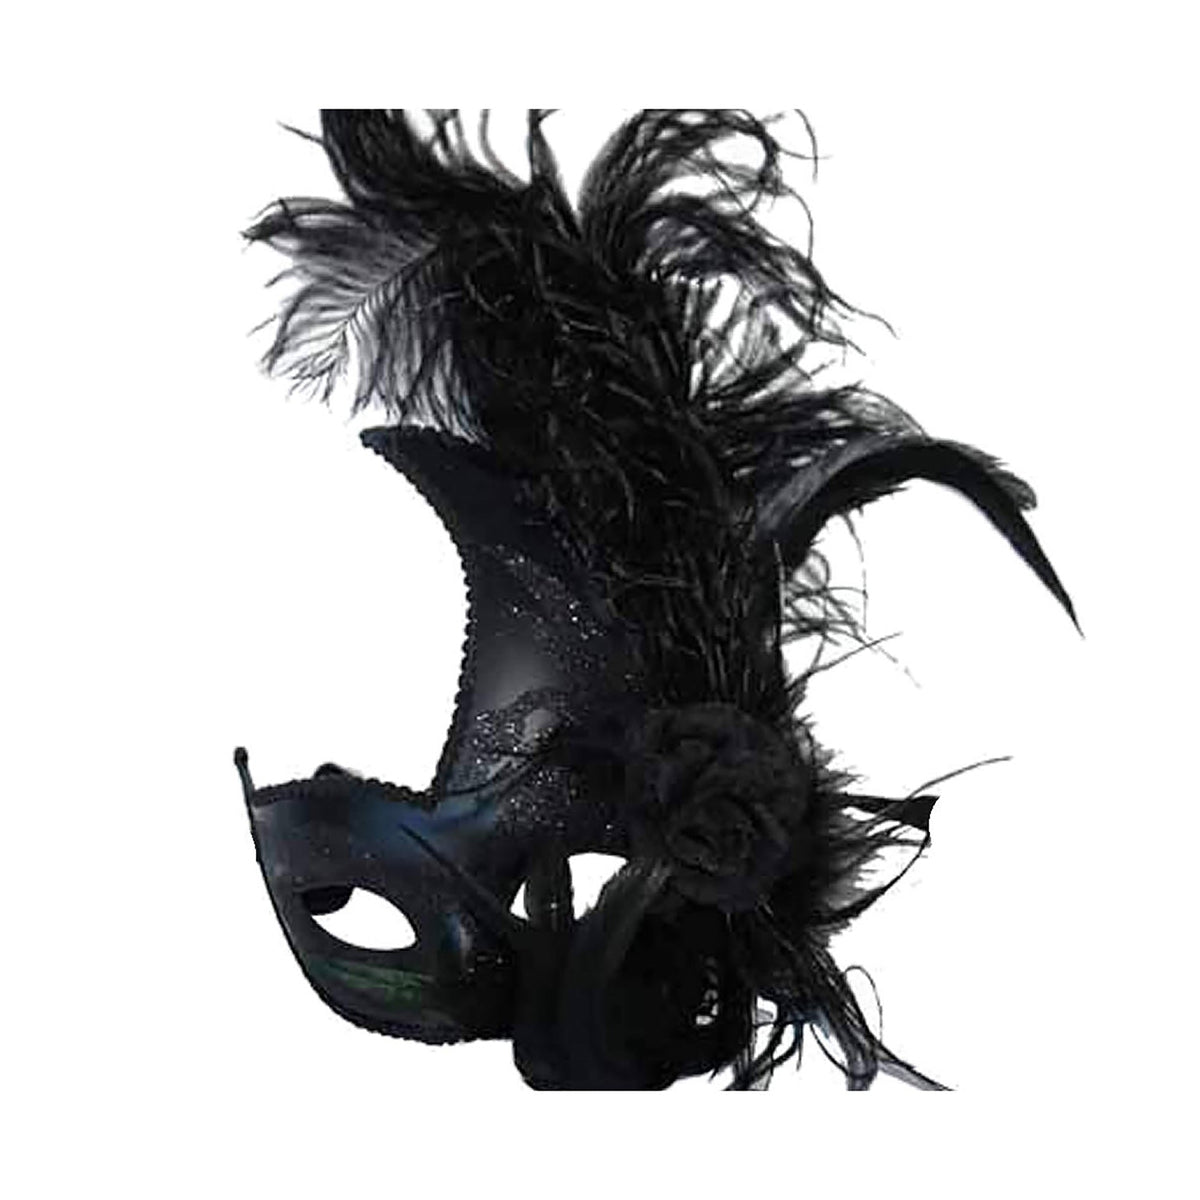 KBW GLOBAL CORP Costume Accessories Venitian Mask With Ostrich Feather Black, 1 count